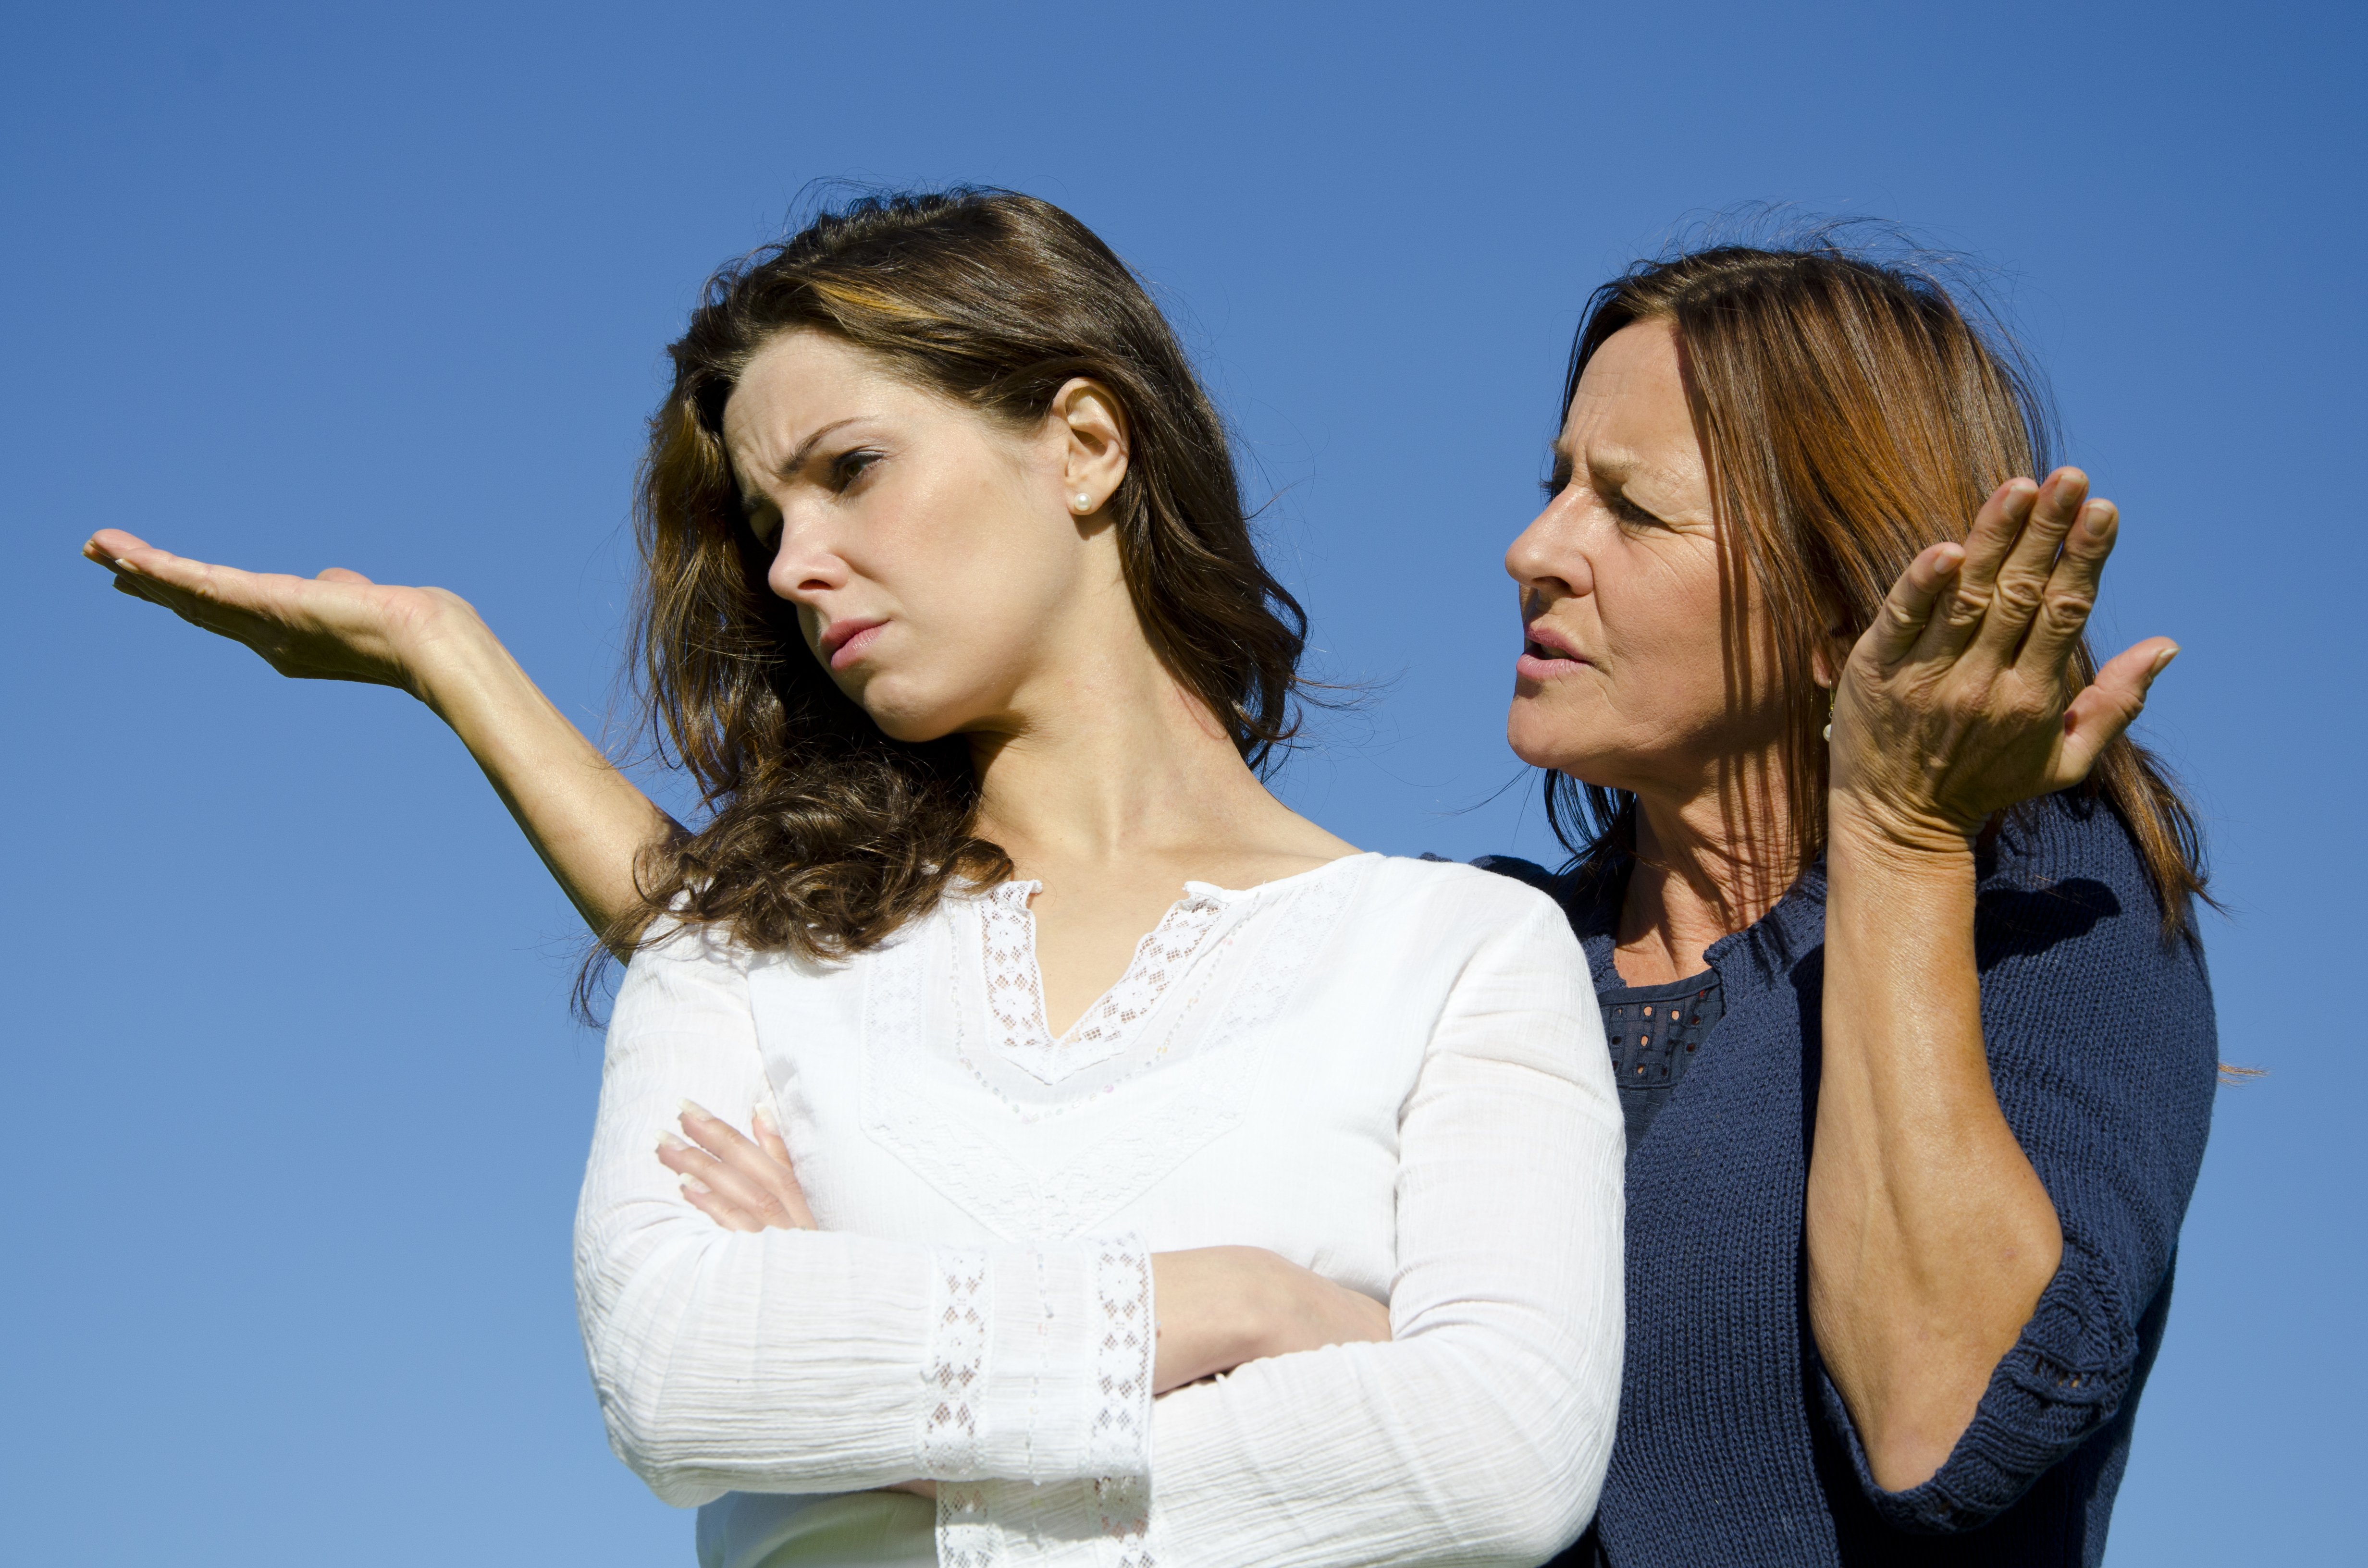 Mother and daughter involved in an argument | Source: Shutterstock